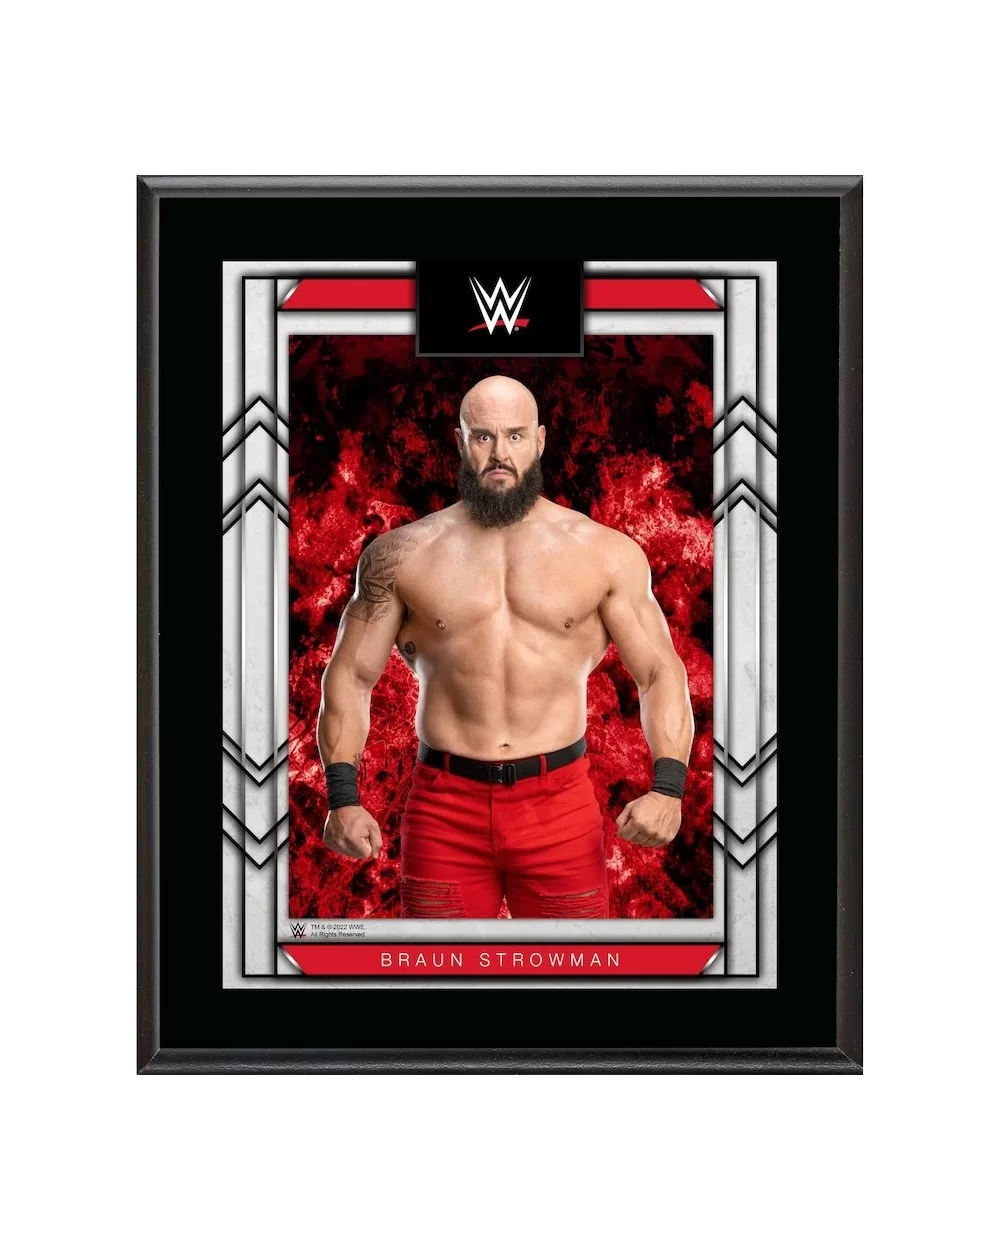 Braun Strowman 10.5" x 13" Sublimated Plaque $10.56 Home & Office